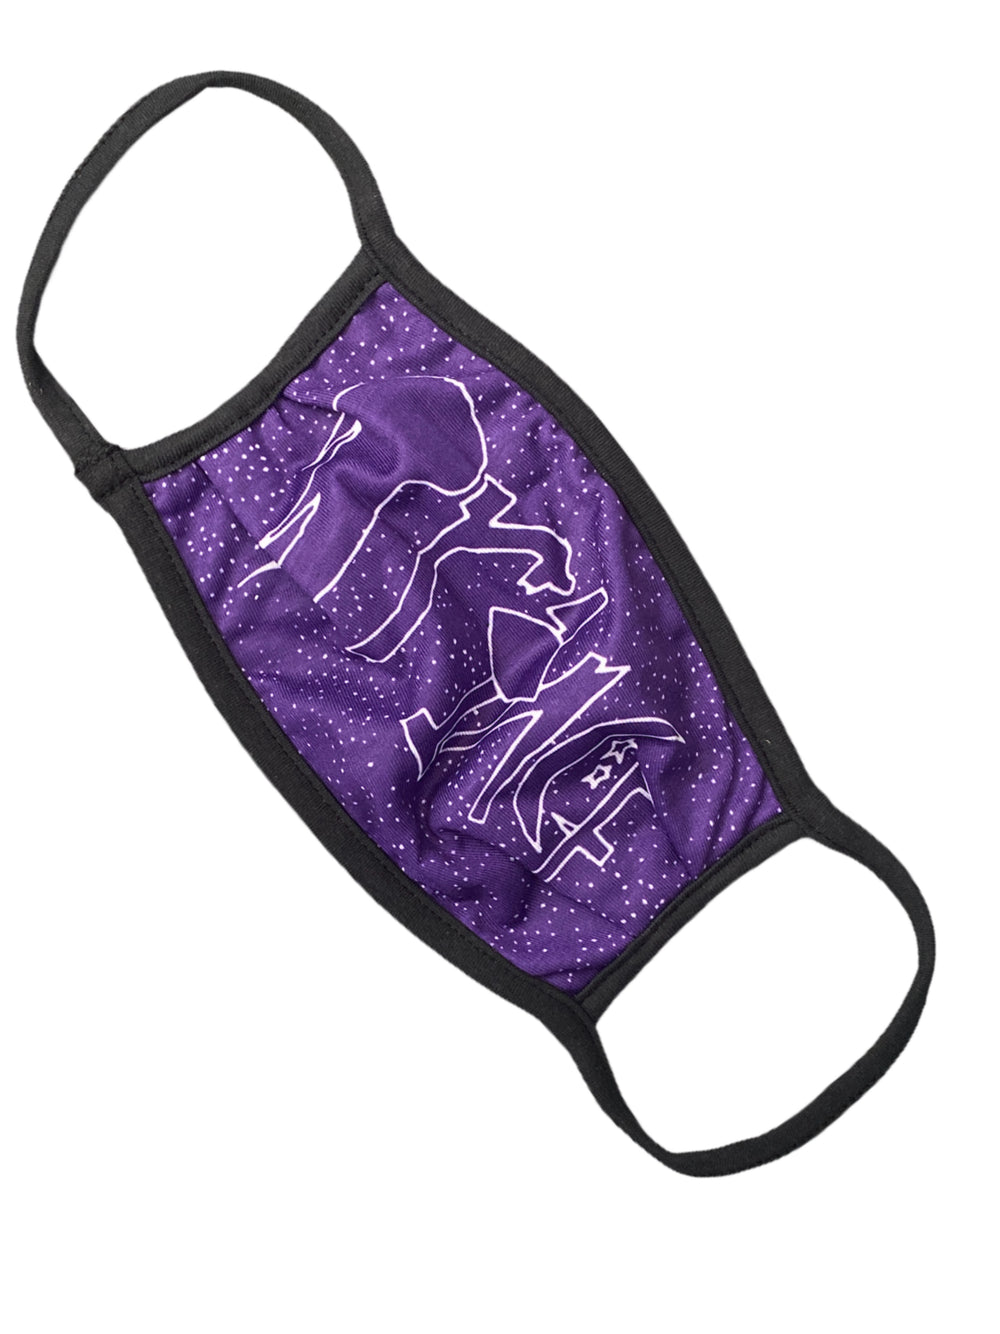 Prince – Paisley Park Official Merchandise Face Mask Covering  Prince 1999 NEW